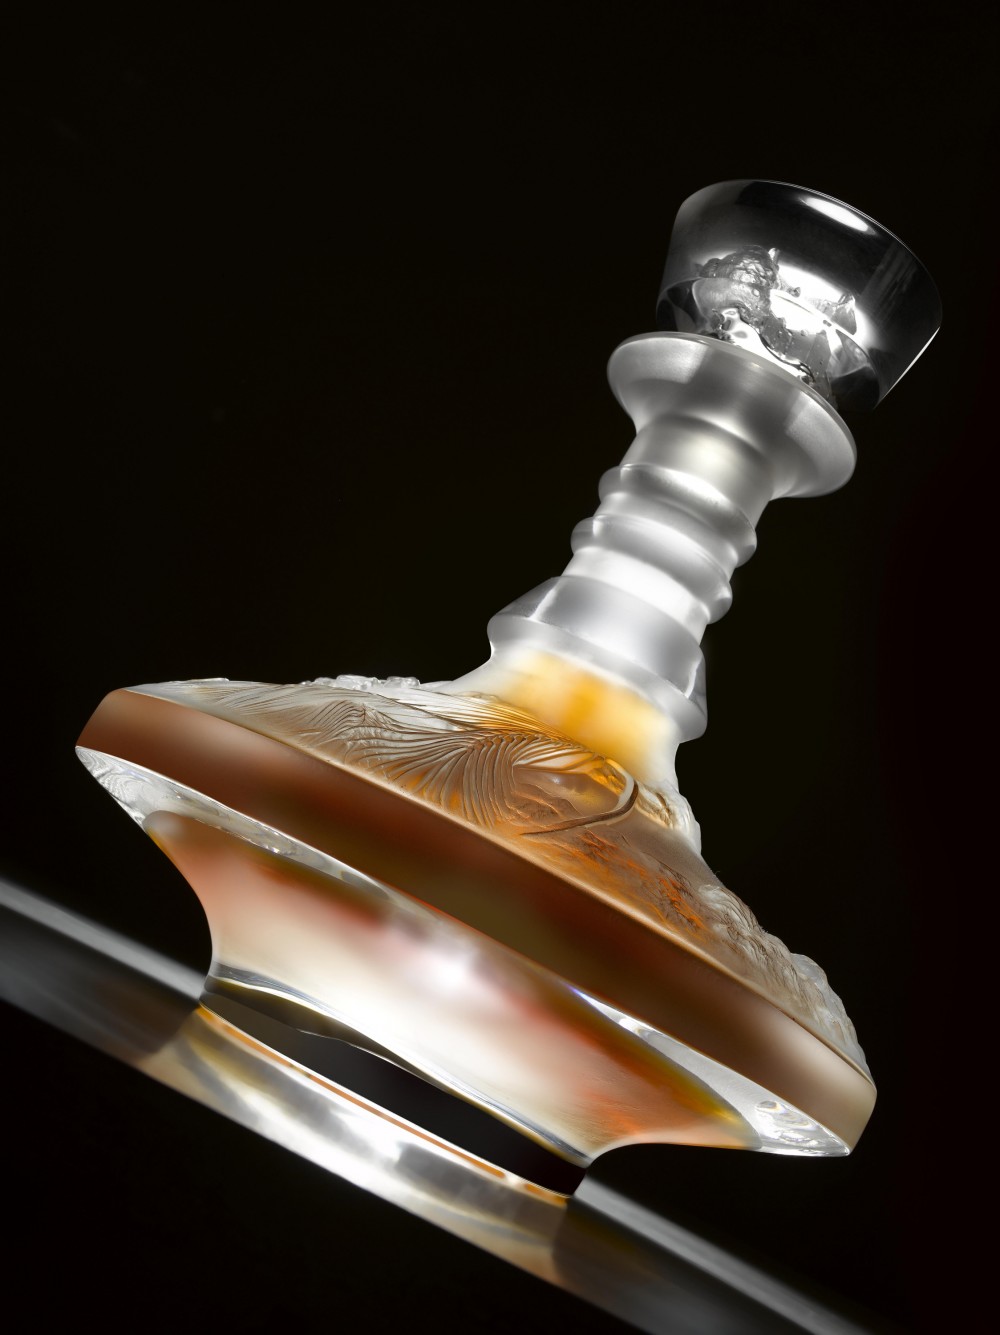 10. Macallan 64 Year Old in Lalique – $460000.